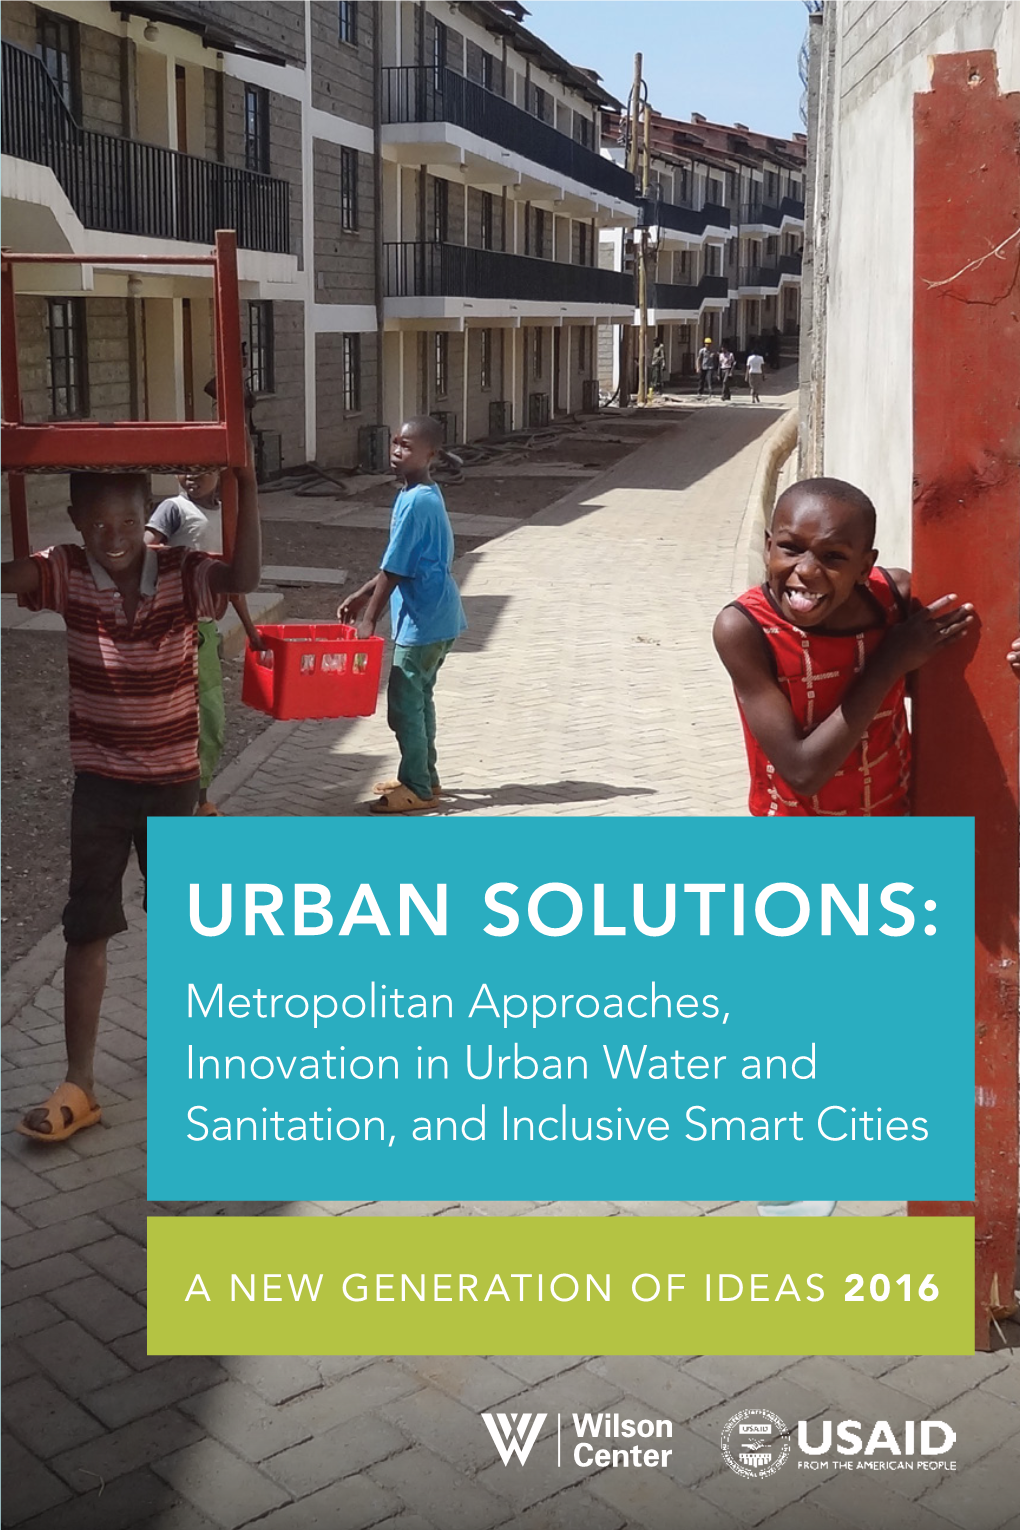 URBAN SOLUTIONS: Metropolitan Innovation Approaches, in Urban Water and Sanitation, and Inclusive Cities Smart